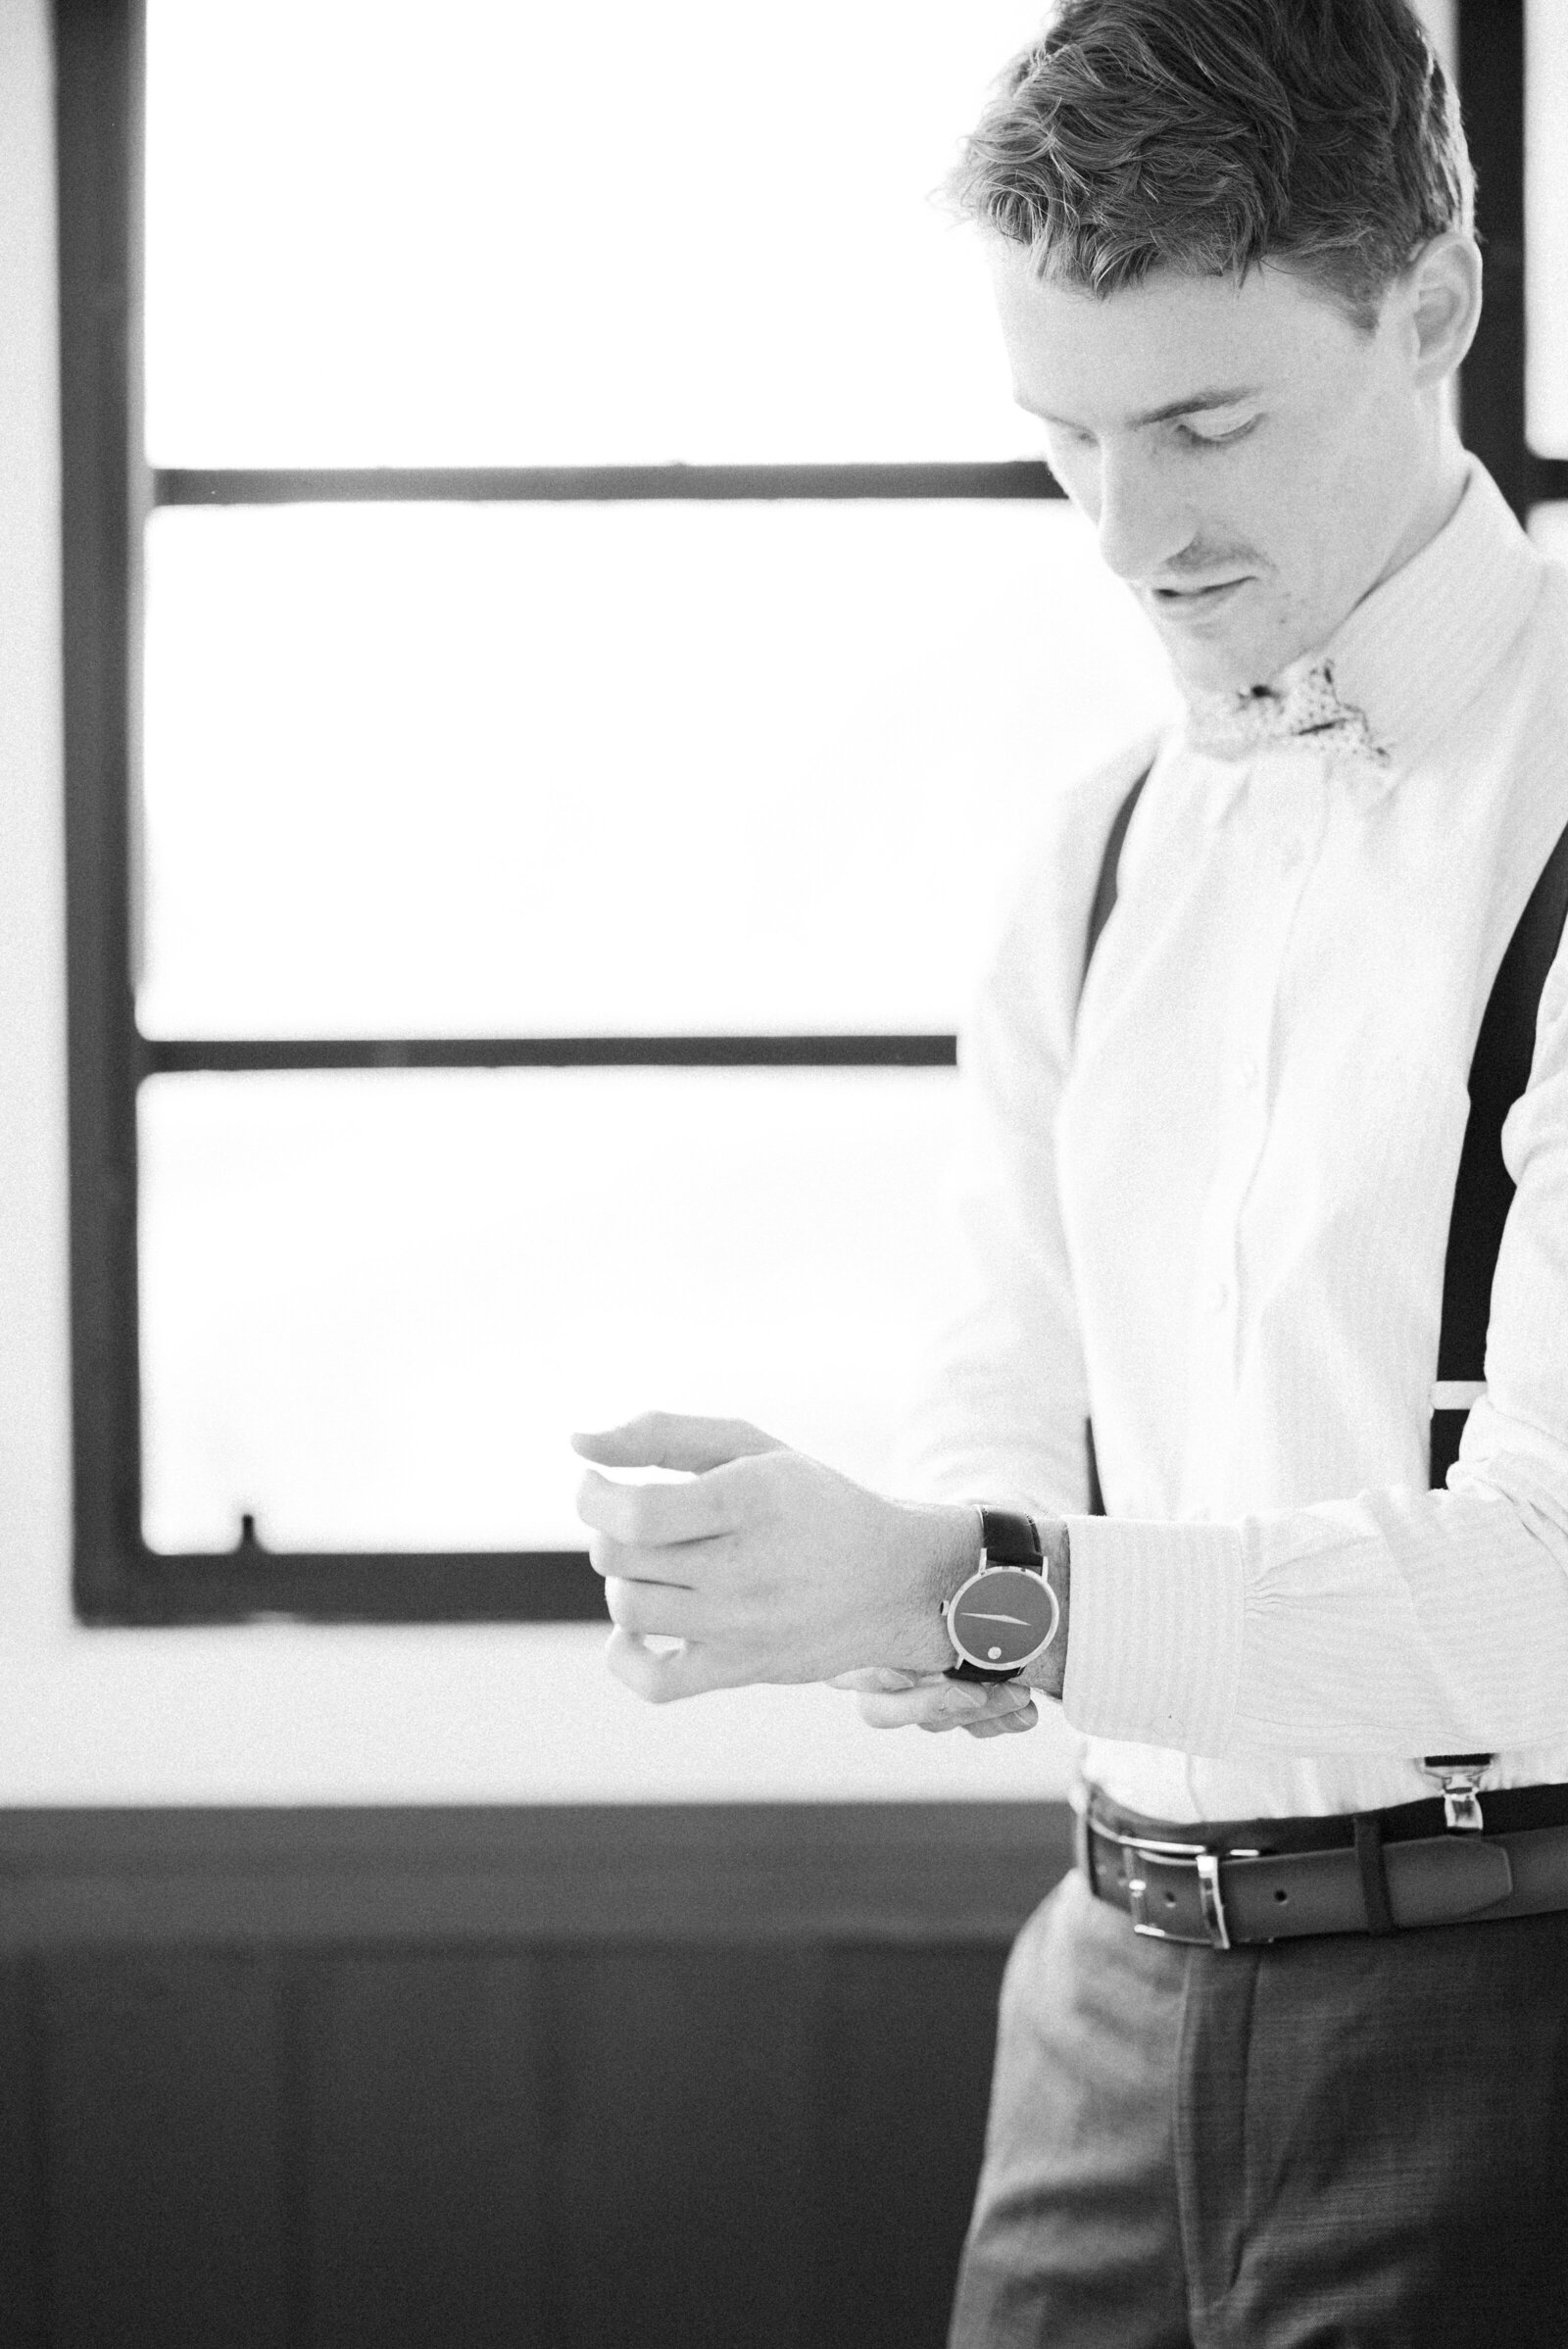 Groom getting ready for his wedding, putting his watch on his wrist while looking down at it.